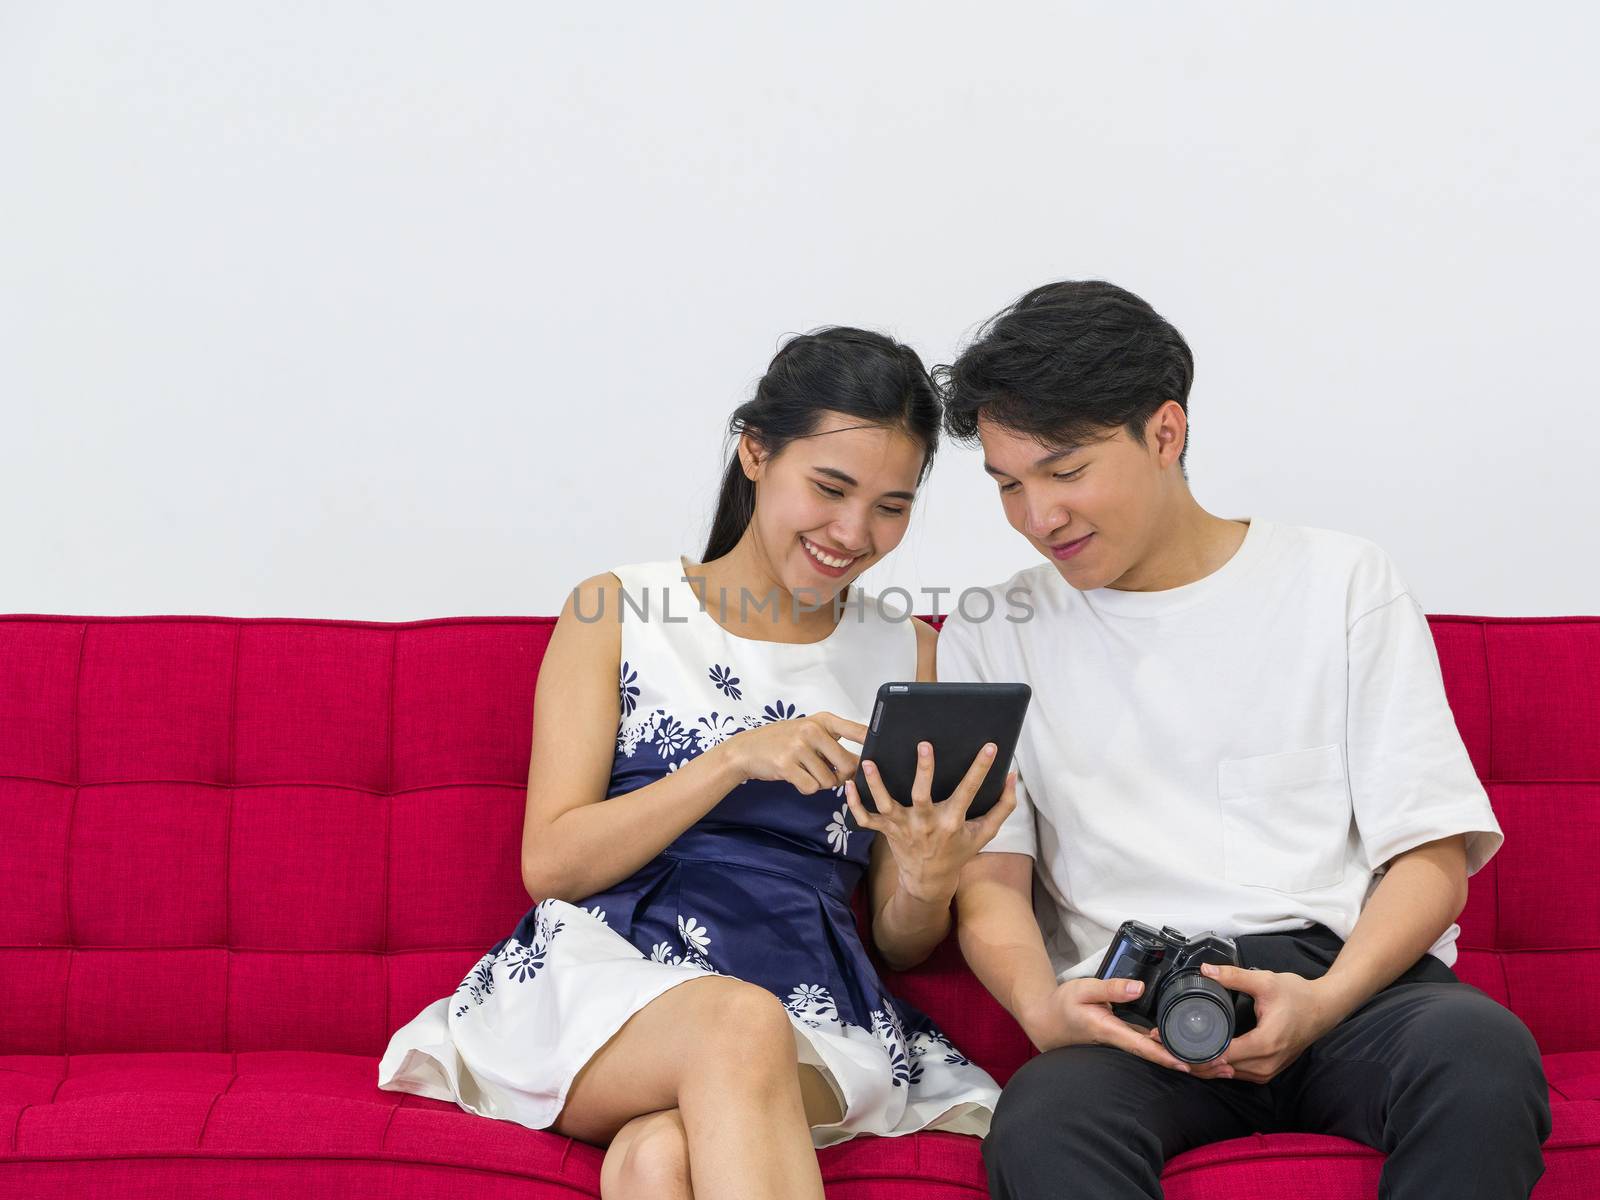 Asian photographers allow models to view pictures taken on the tablet computer screen while sitting on a red sofa. Working atmosphere in the photo studio